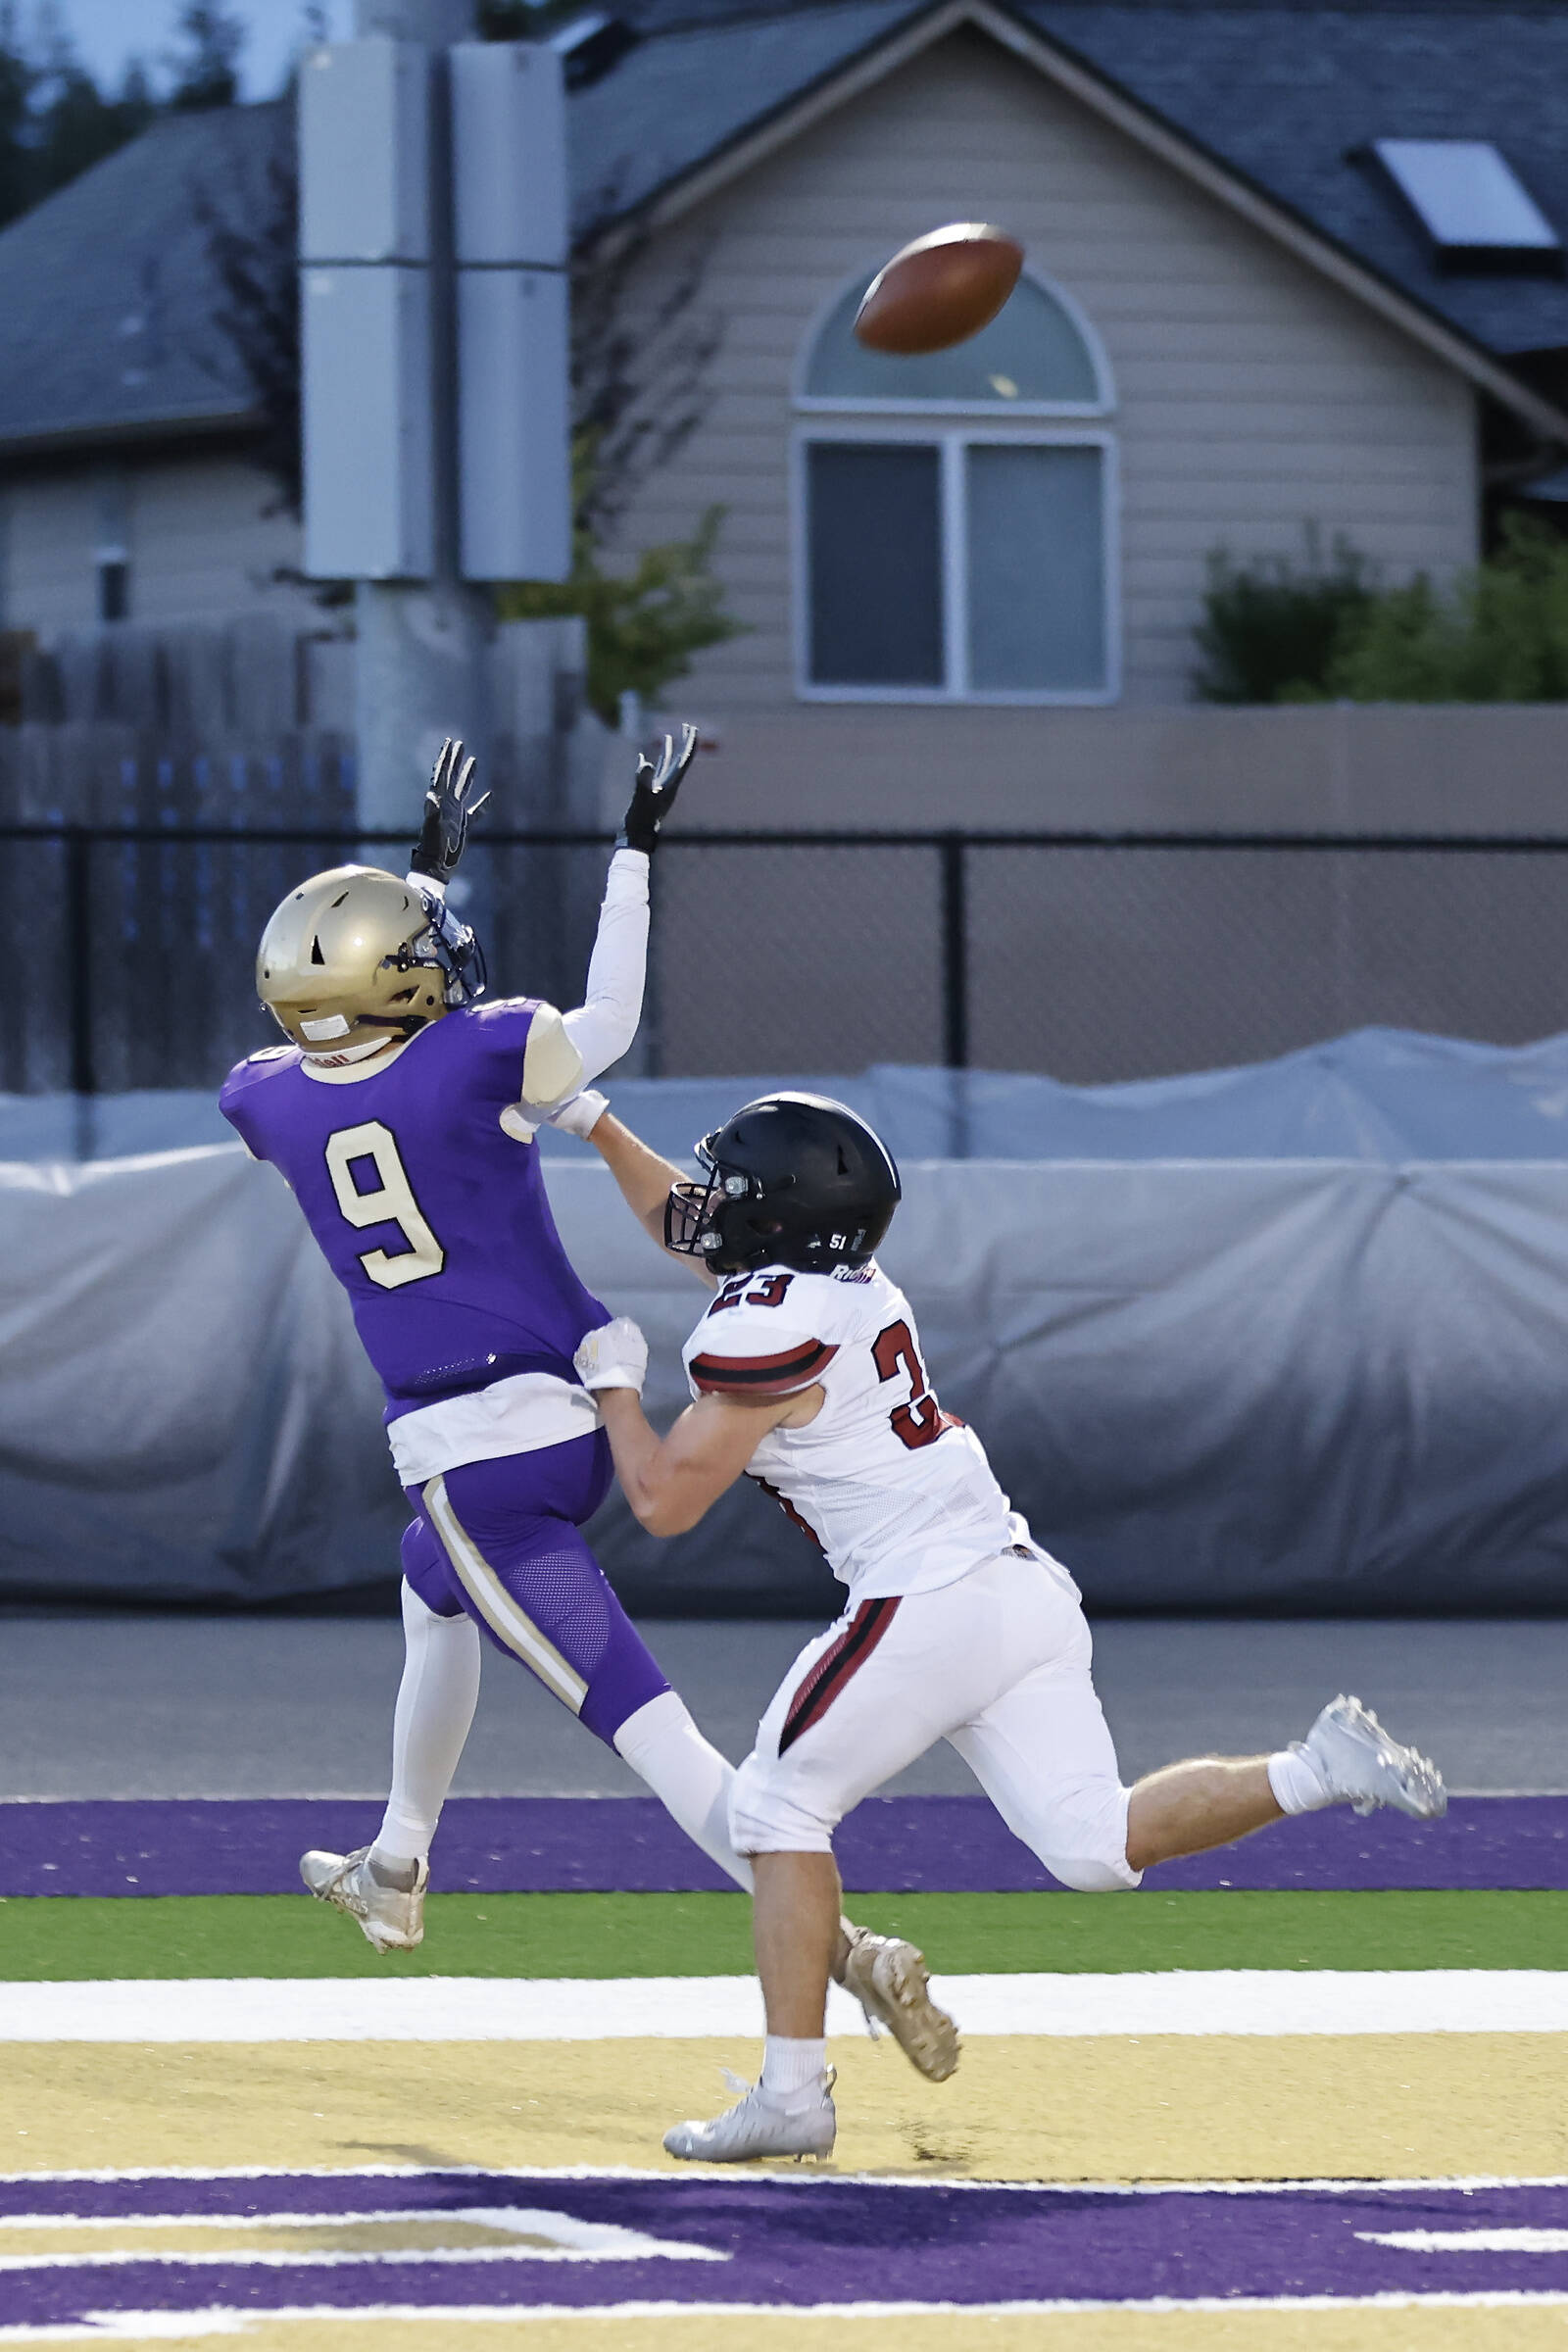 Photo by John Fisken
Oak Harbor senior Will Rankin anticipates the ball during Friday night’s home game. The Wildcats won 28-12 over the Cedarcrest Red Wolves.